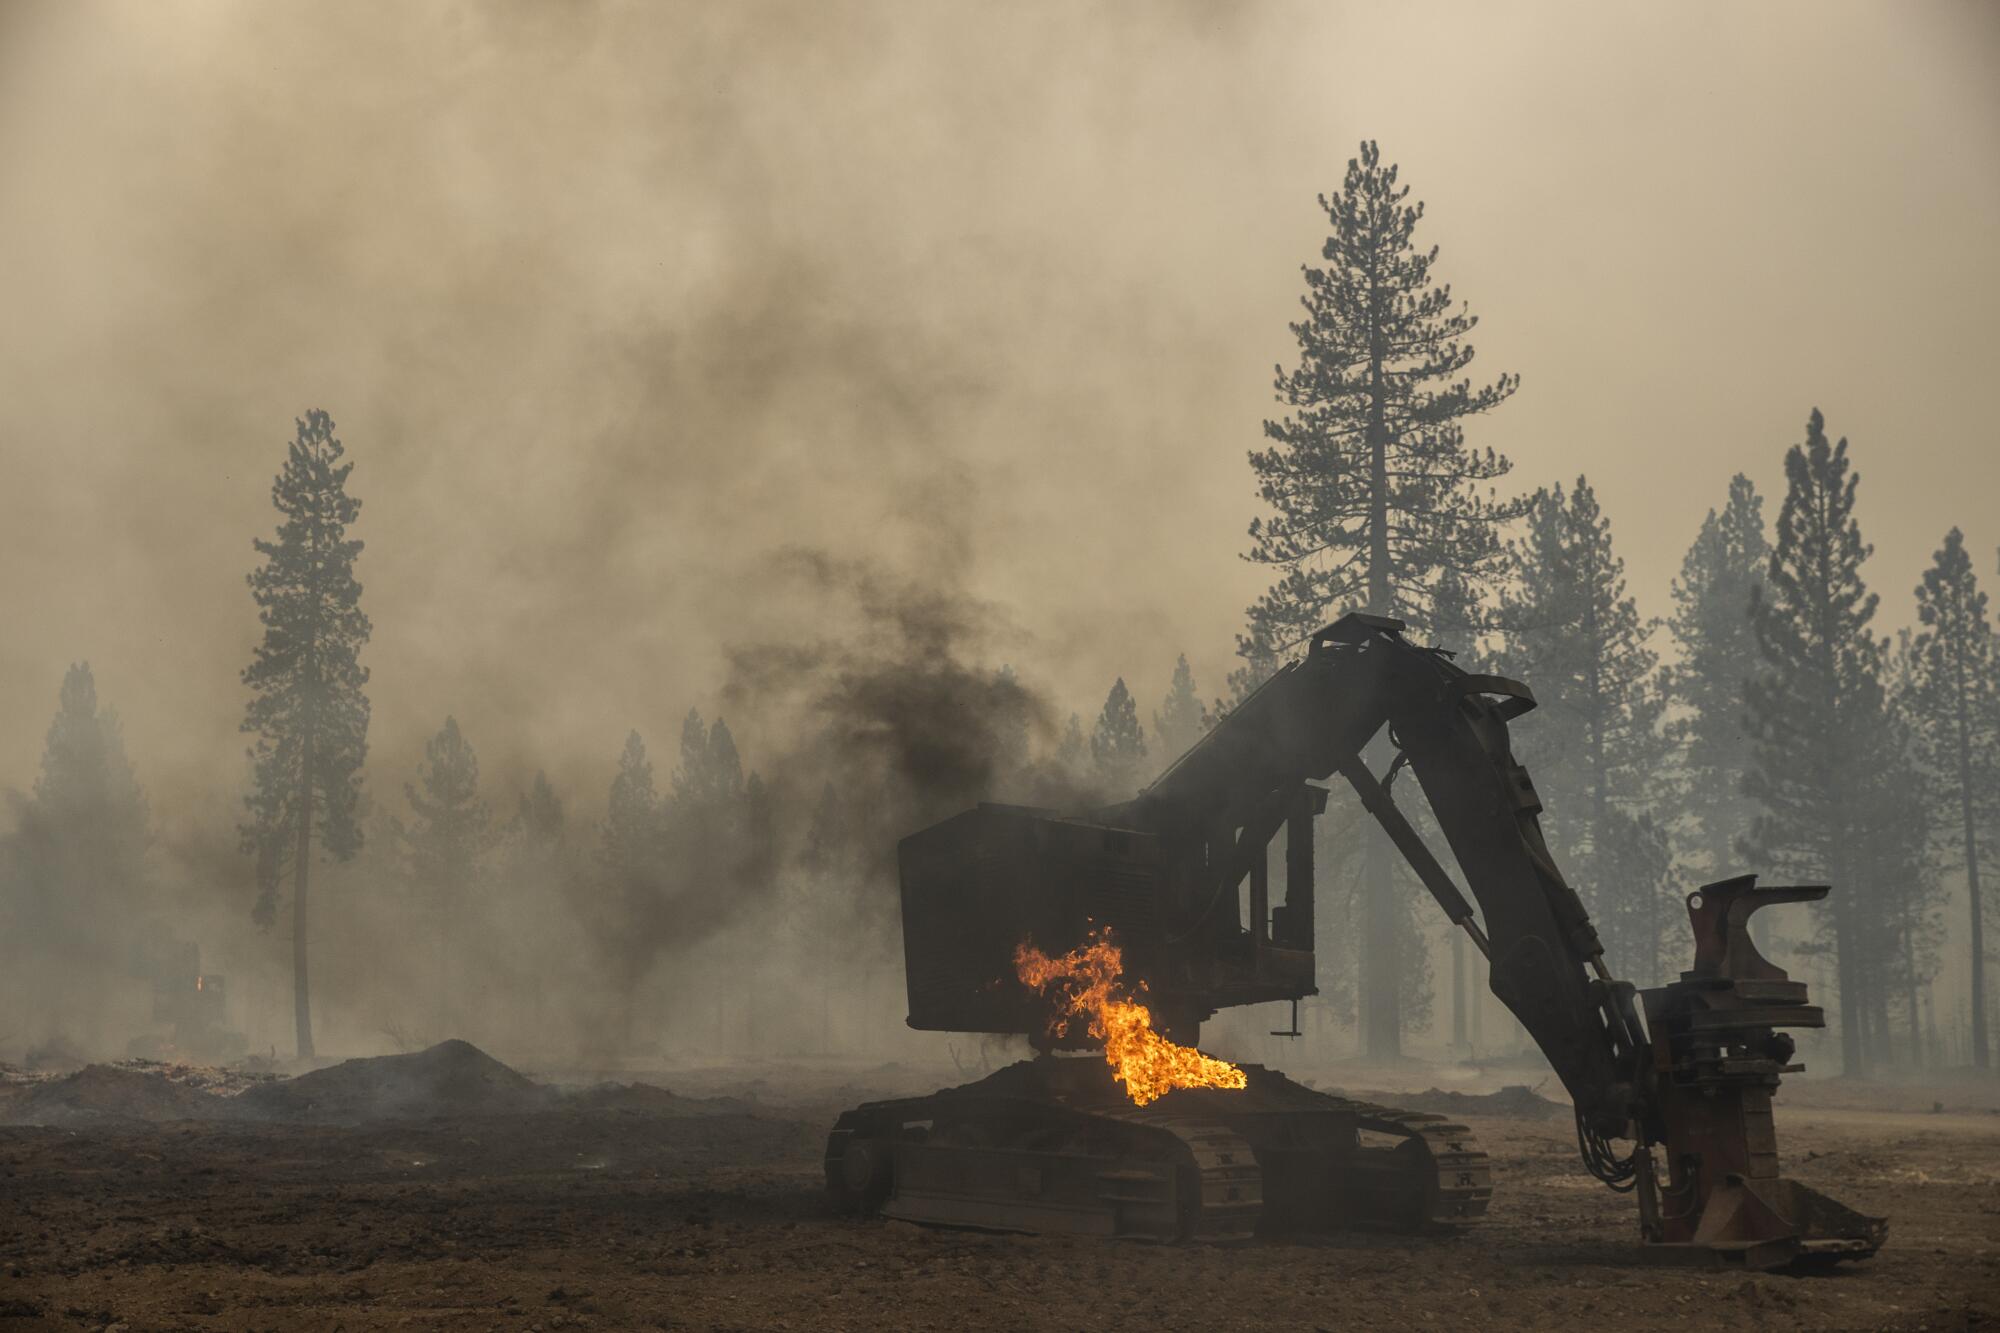 A feller-buncher burns along County Road 324 during the Dixie Fire in Chester, California on Wednesday, Aug. 4, 2021.